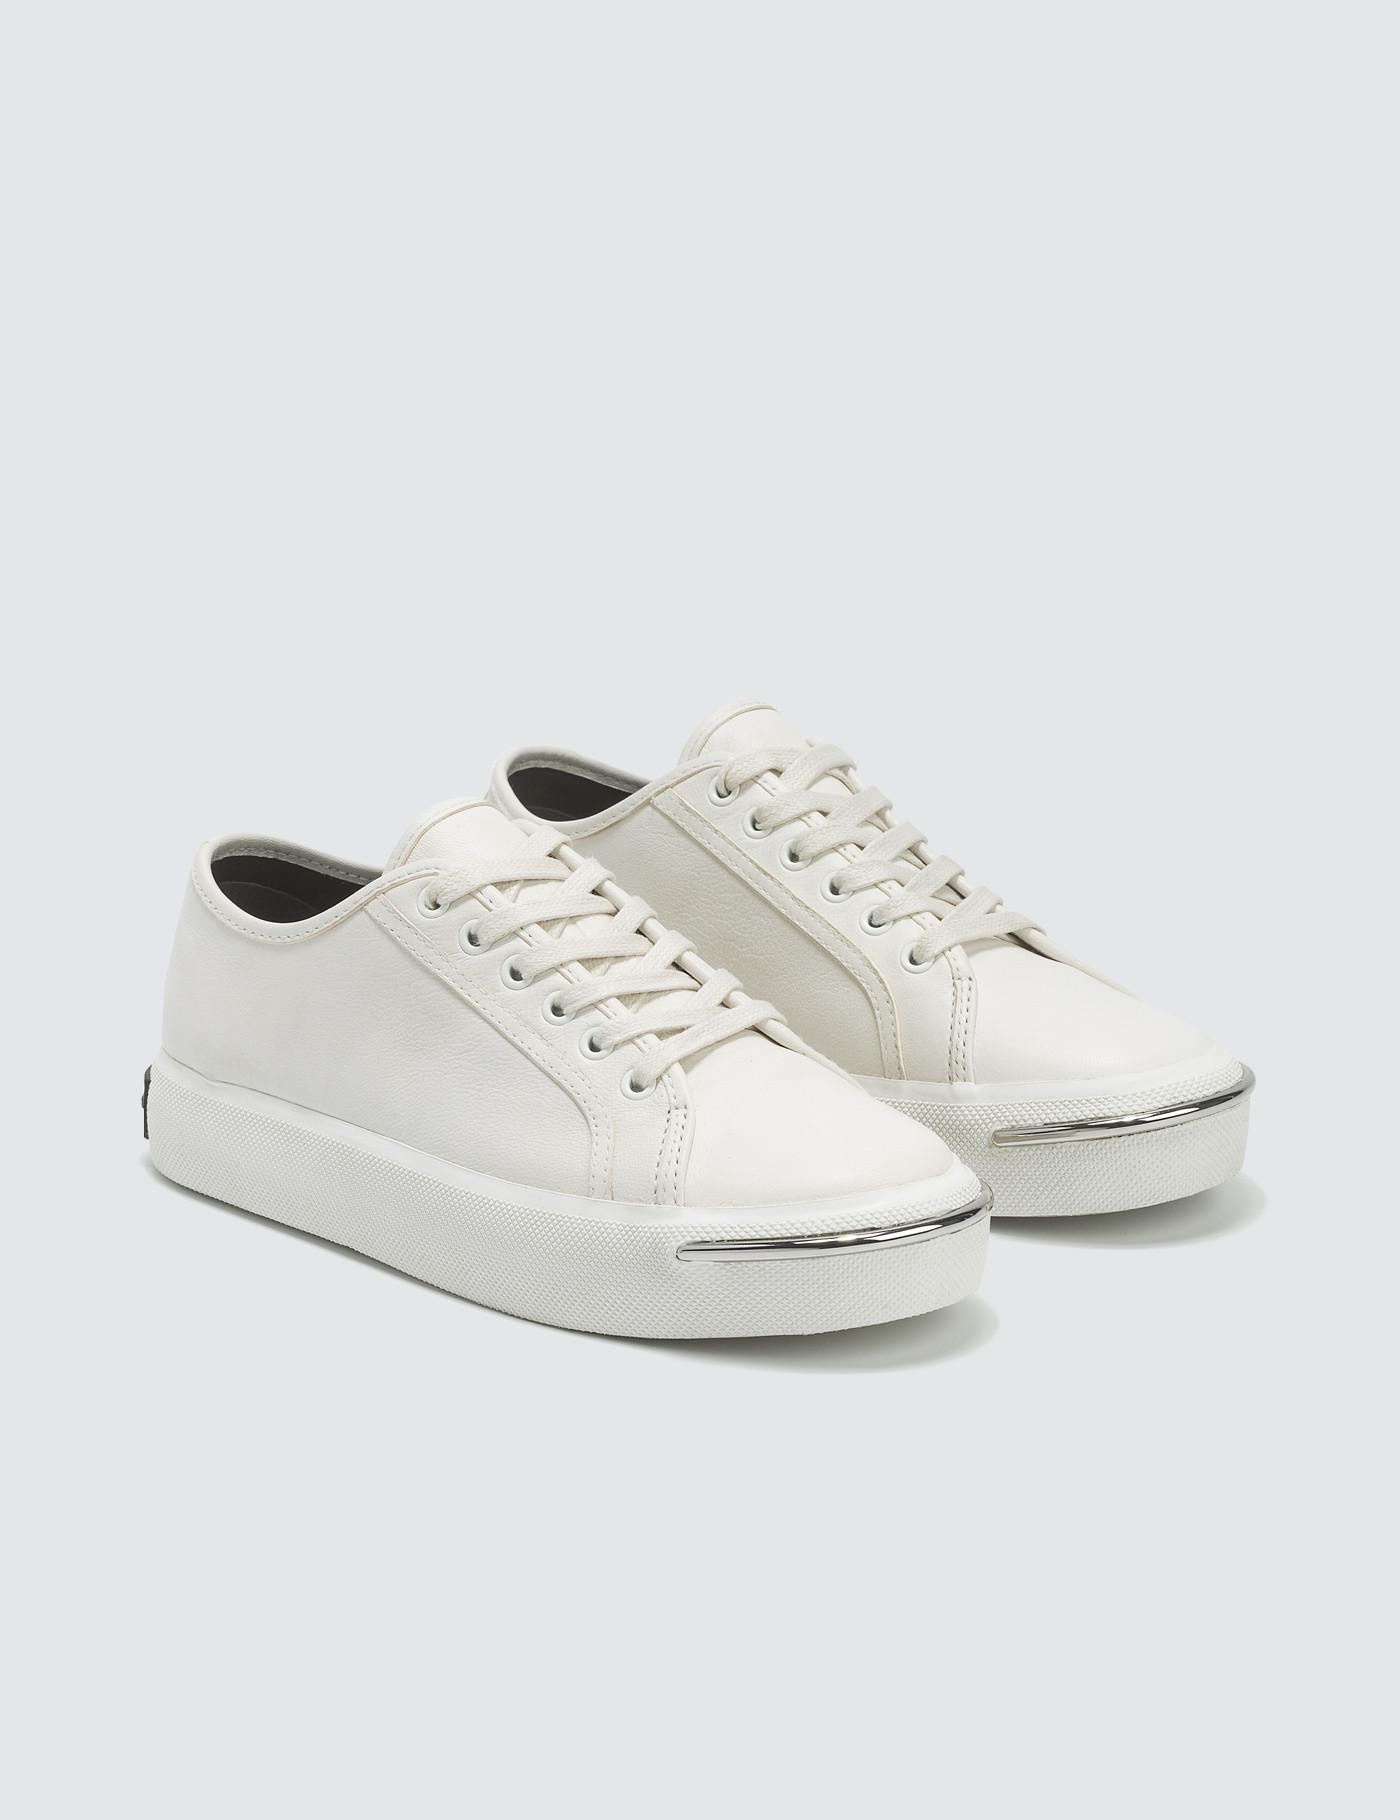 Alexander Wang Women's Pia Low Top Leather Platform Sneakers in White ...